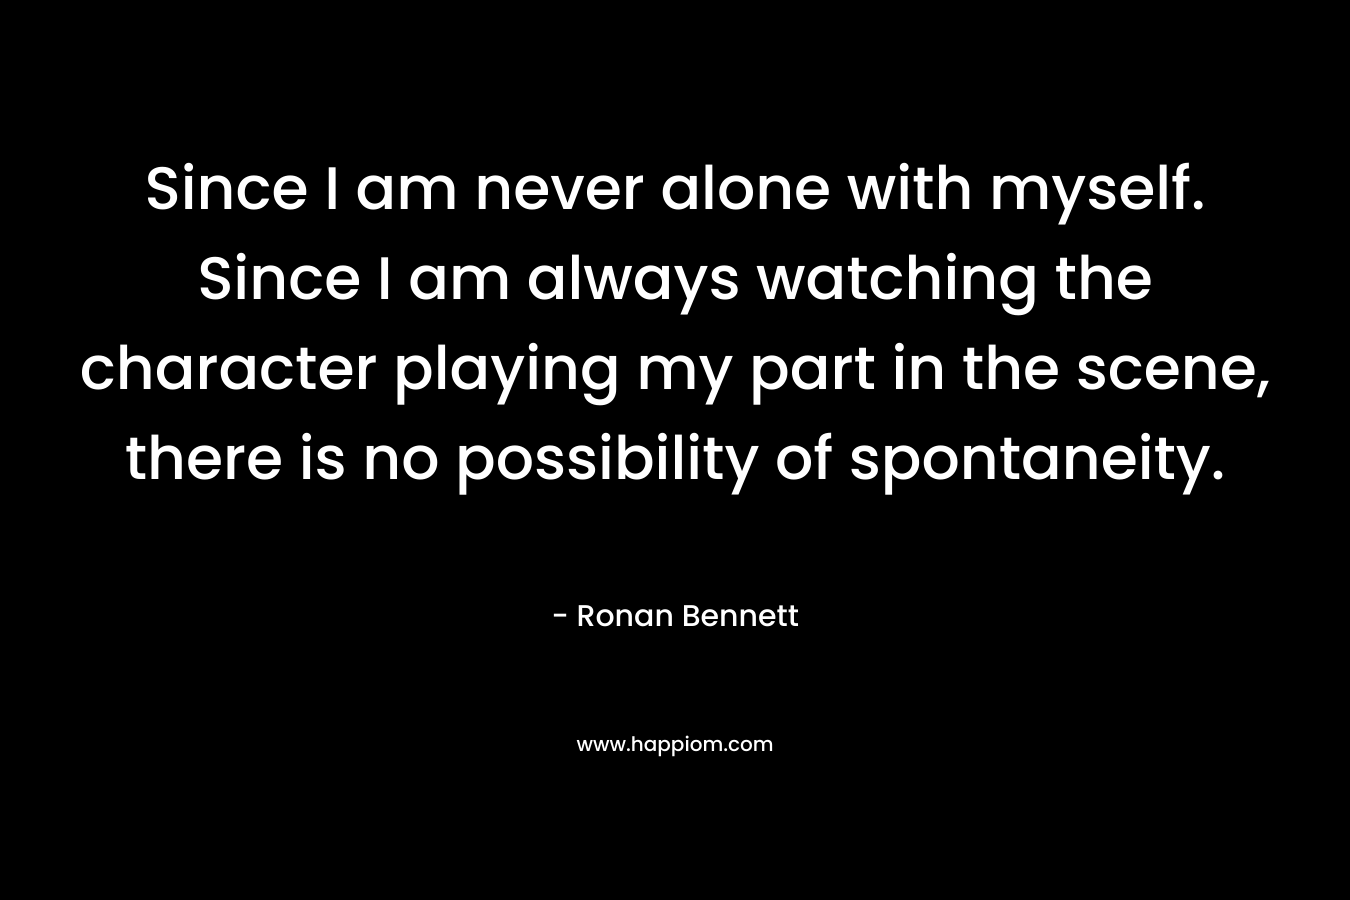 Since I am never alone with myself. Since I am always watching the character playing my part in the scene, there is no possibility of spontaneity. – Ronan Bennett